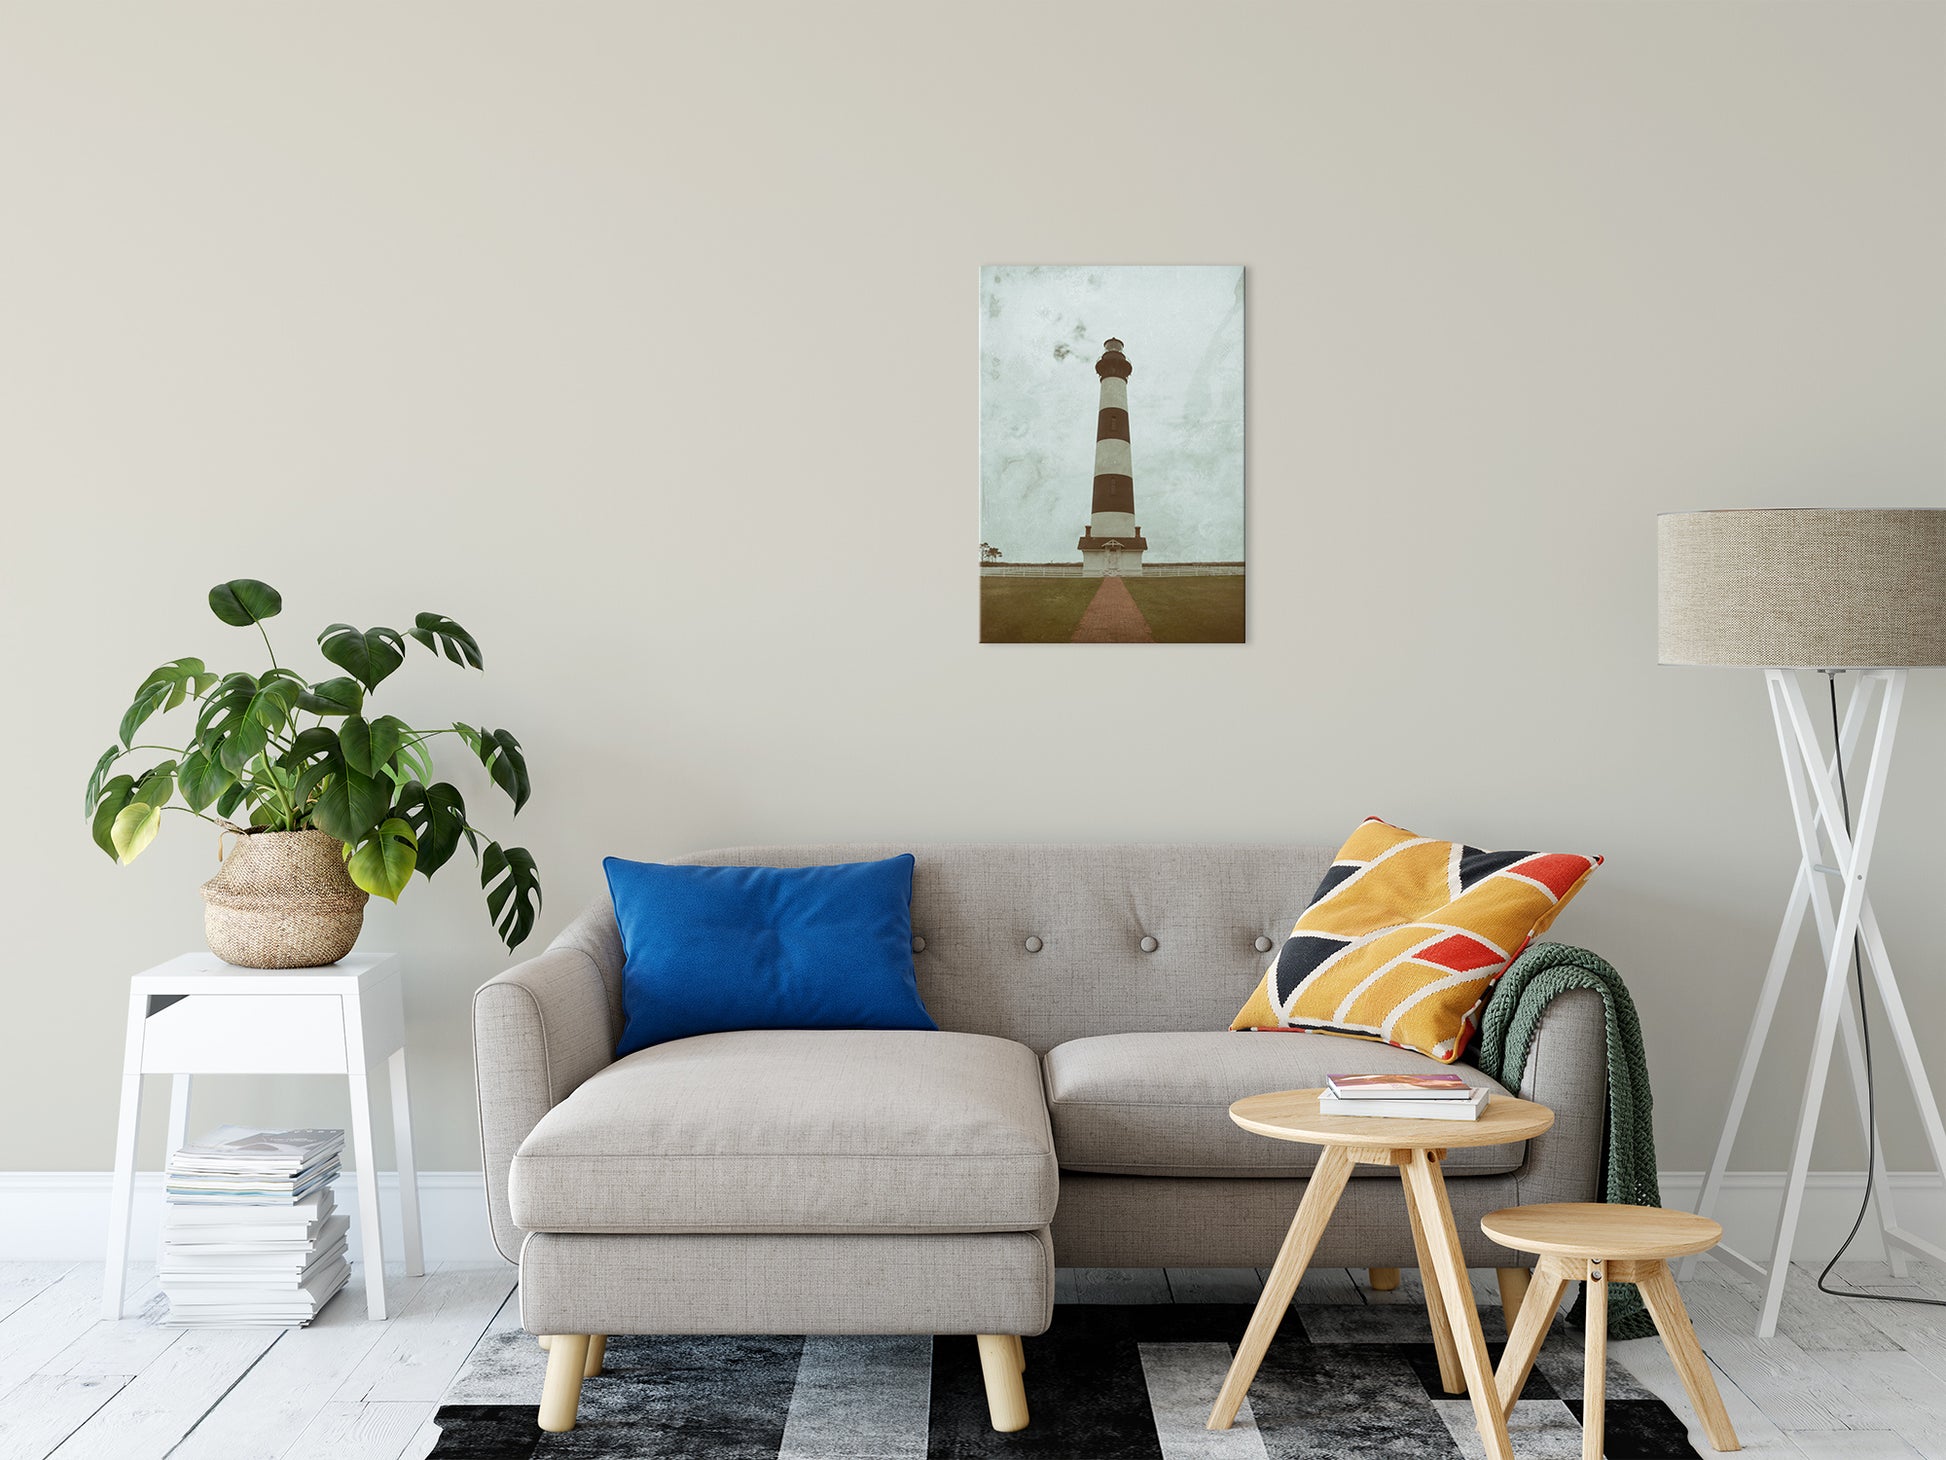 Coastal Pictures For Living Room: Aged Bodie Lighthouse Glass Plate Effect Coastal Landscape Photo Fine Art Canvas Wall Art Prints 20" x 24" - PIPAFINEART